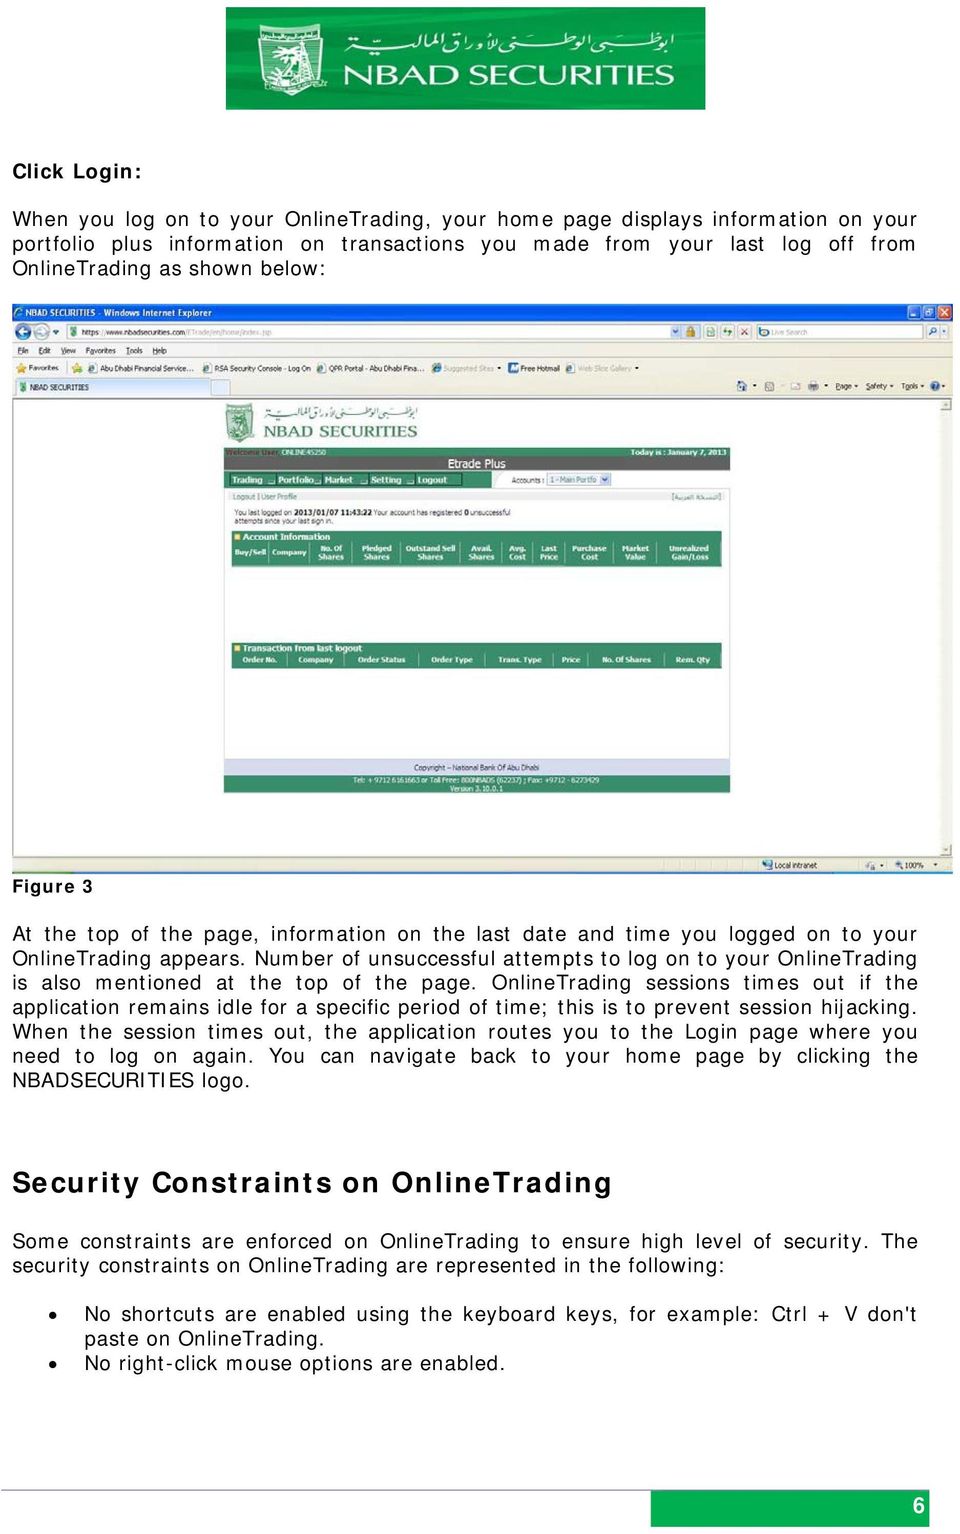 Number of unsuccessful attempts to log on to your OnlineTrading is also mentioned at the top of the page.